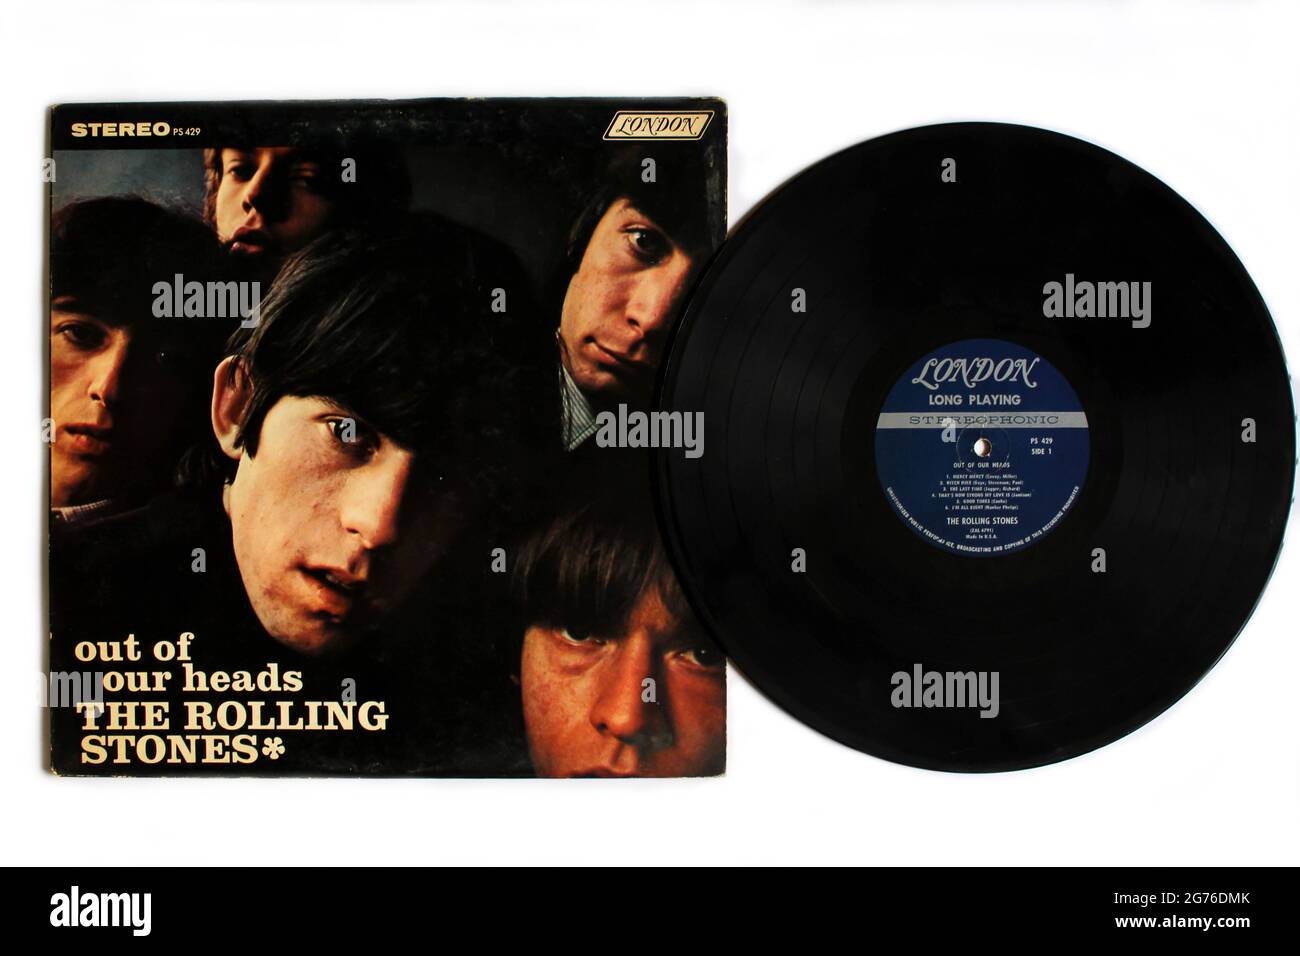 Rock and blues band, The Rolling Stones music album on vinyl record LP disc. Titled: Out of Our Heads album cover Stock Photo